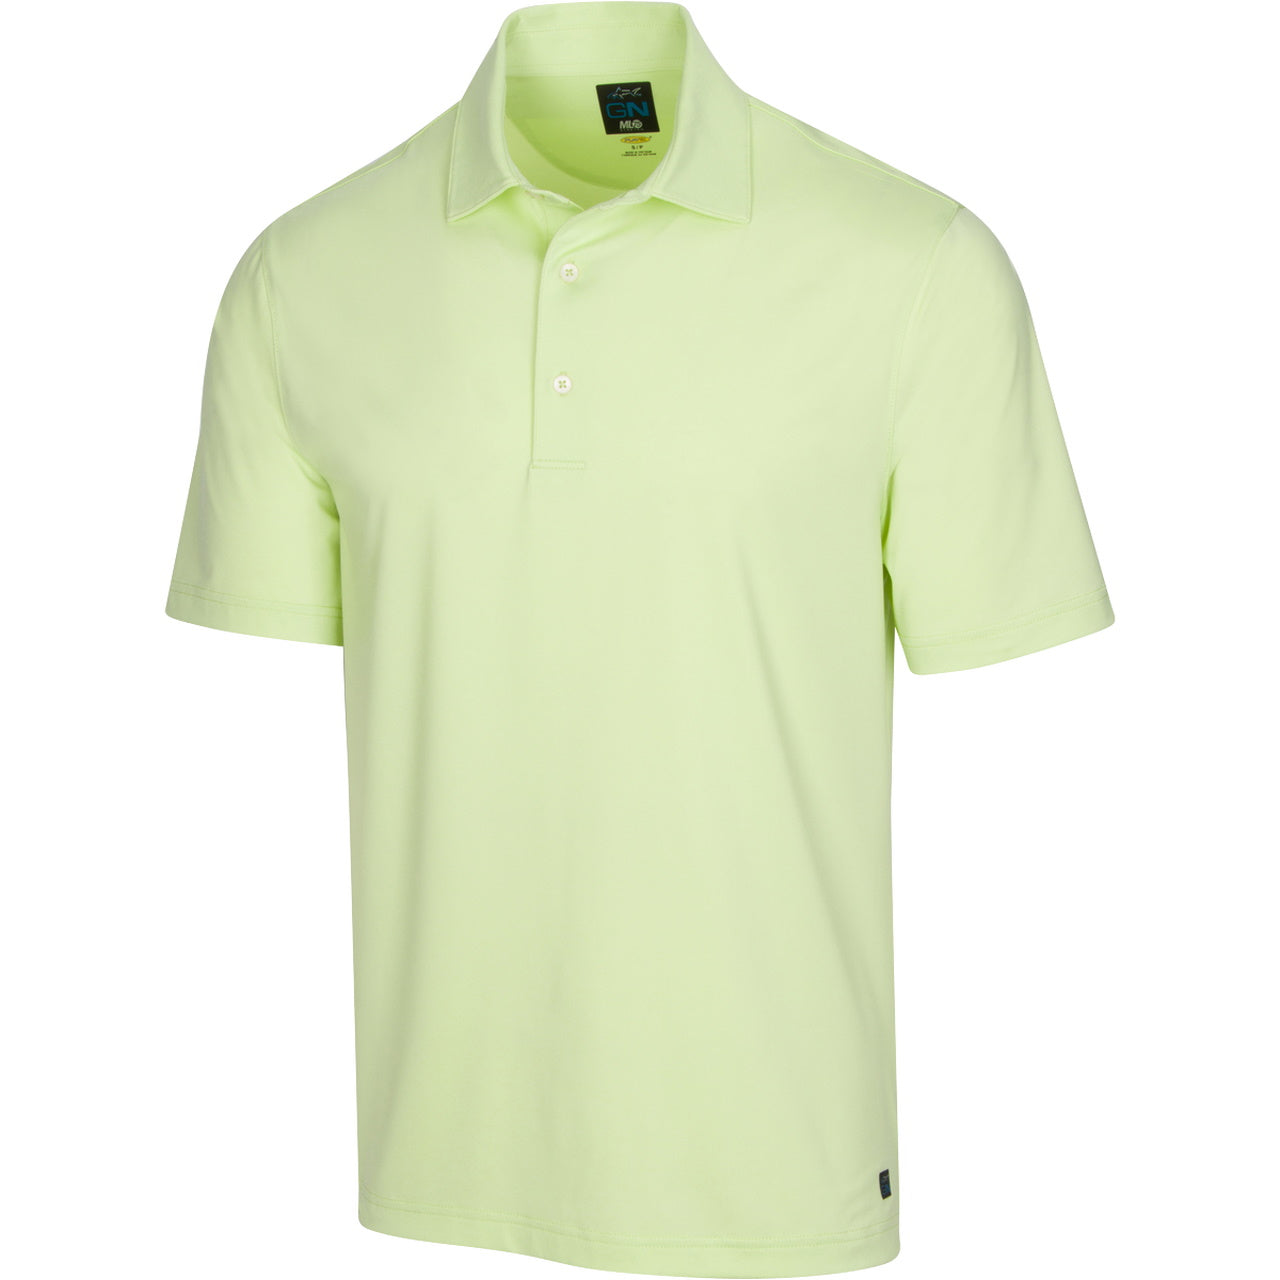 ML75 Stretch Harbor Polo - Greg Norman Collection